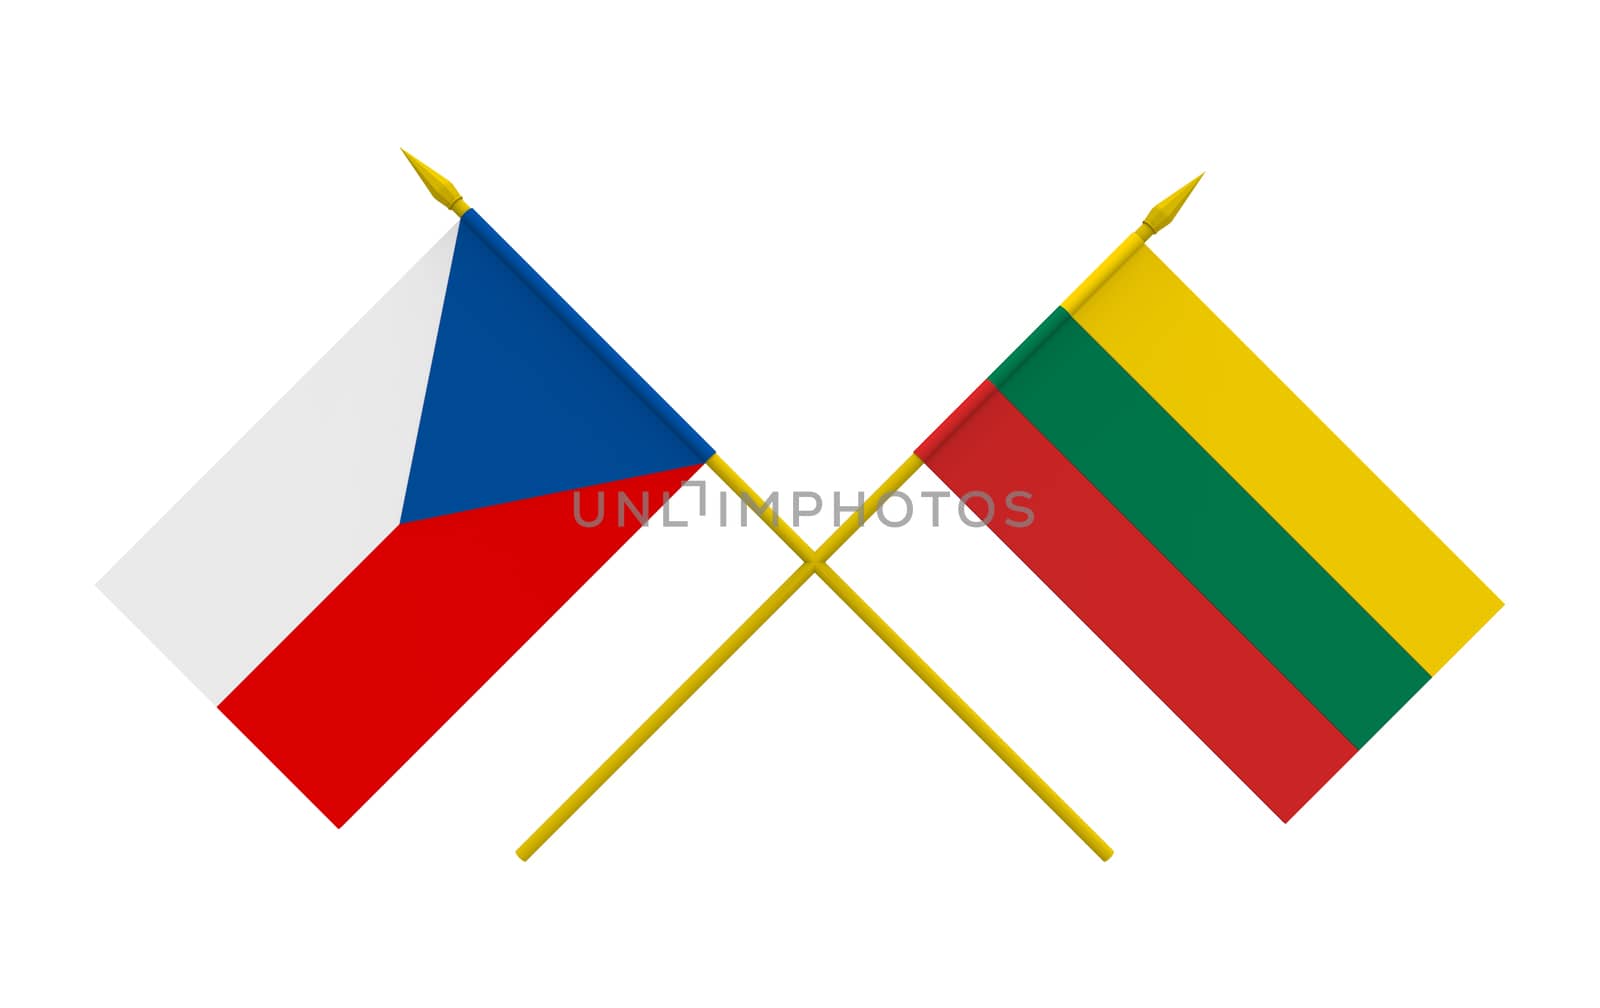 Flags of Czech and Lithuania, 3d render, isolated